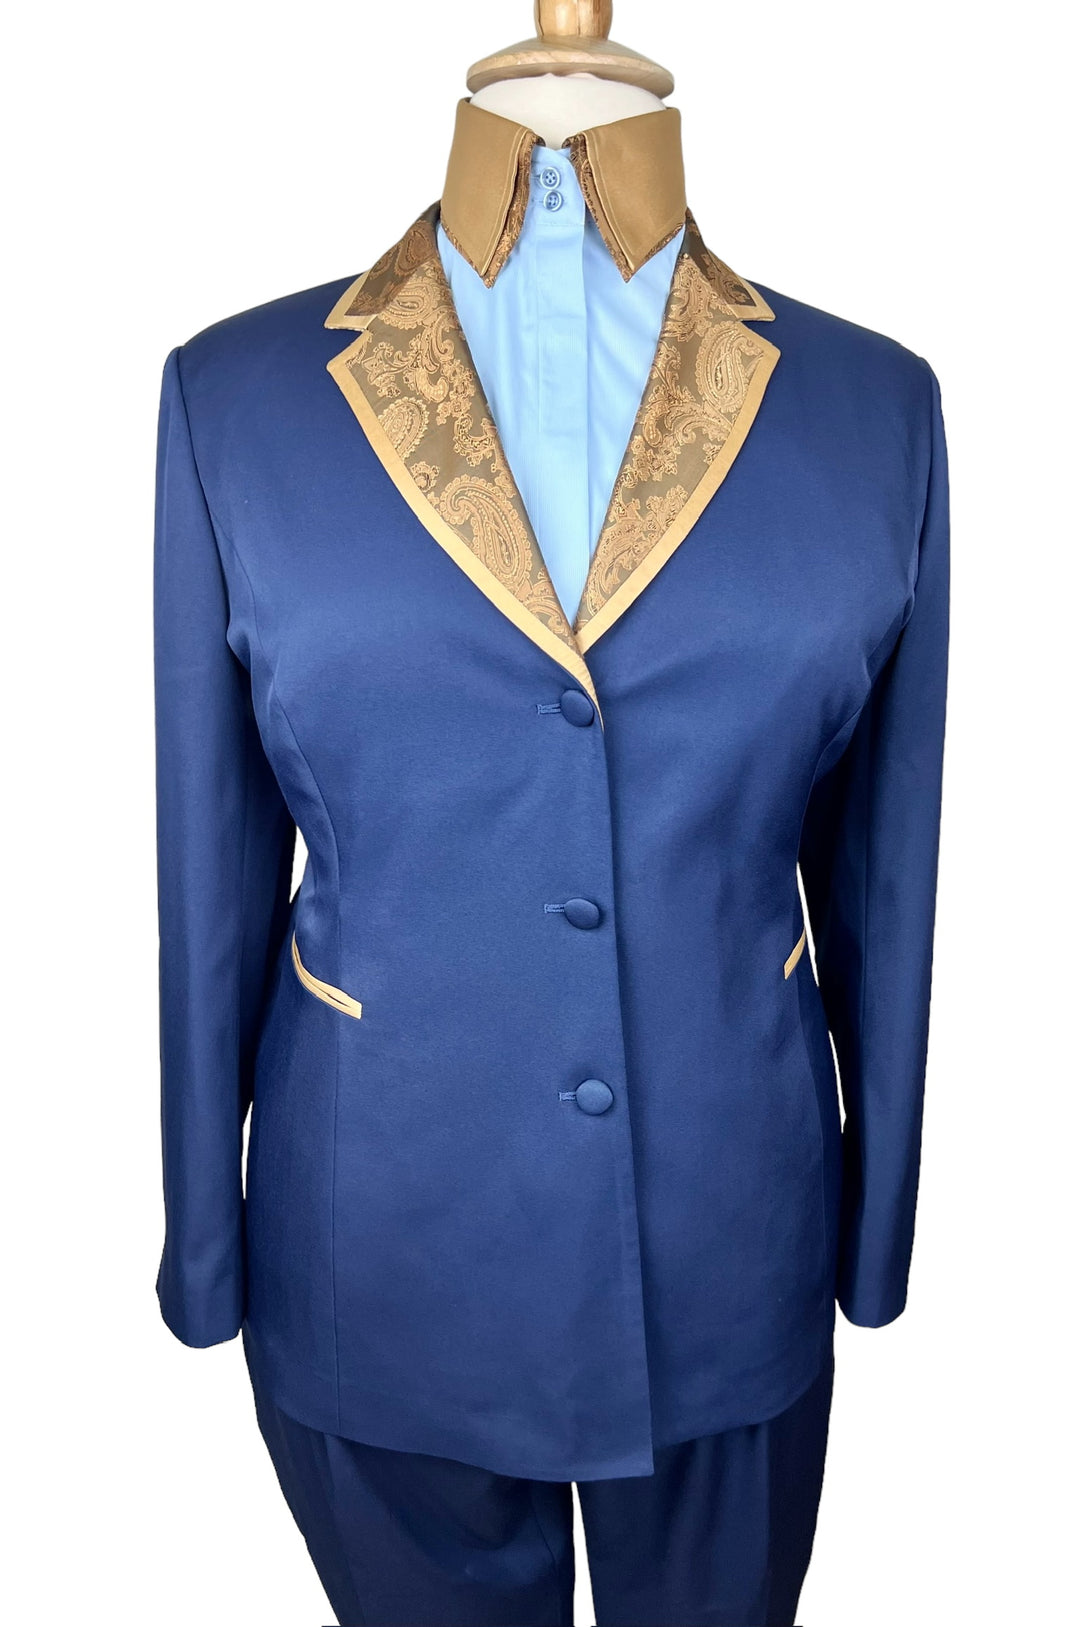 Navy Showmanship Suit with Gold Accents & Matching Shirt